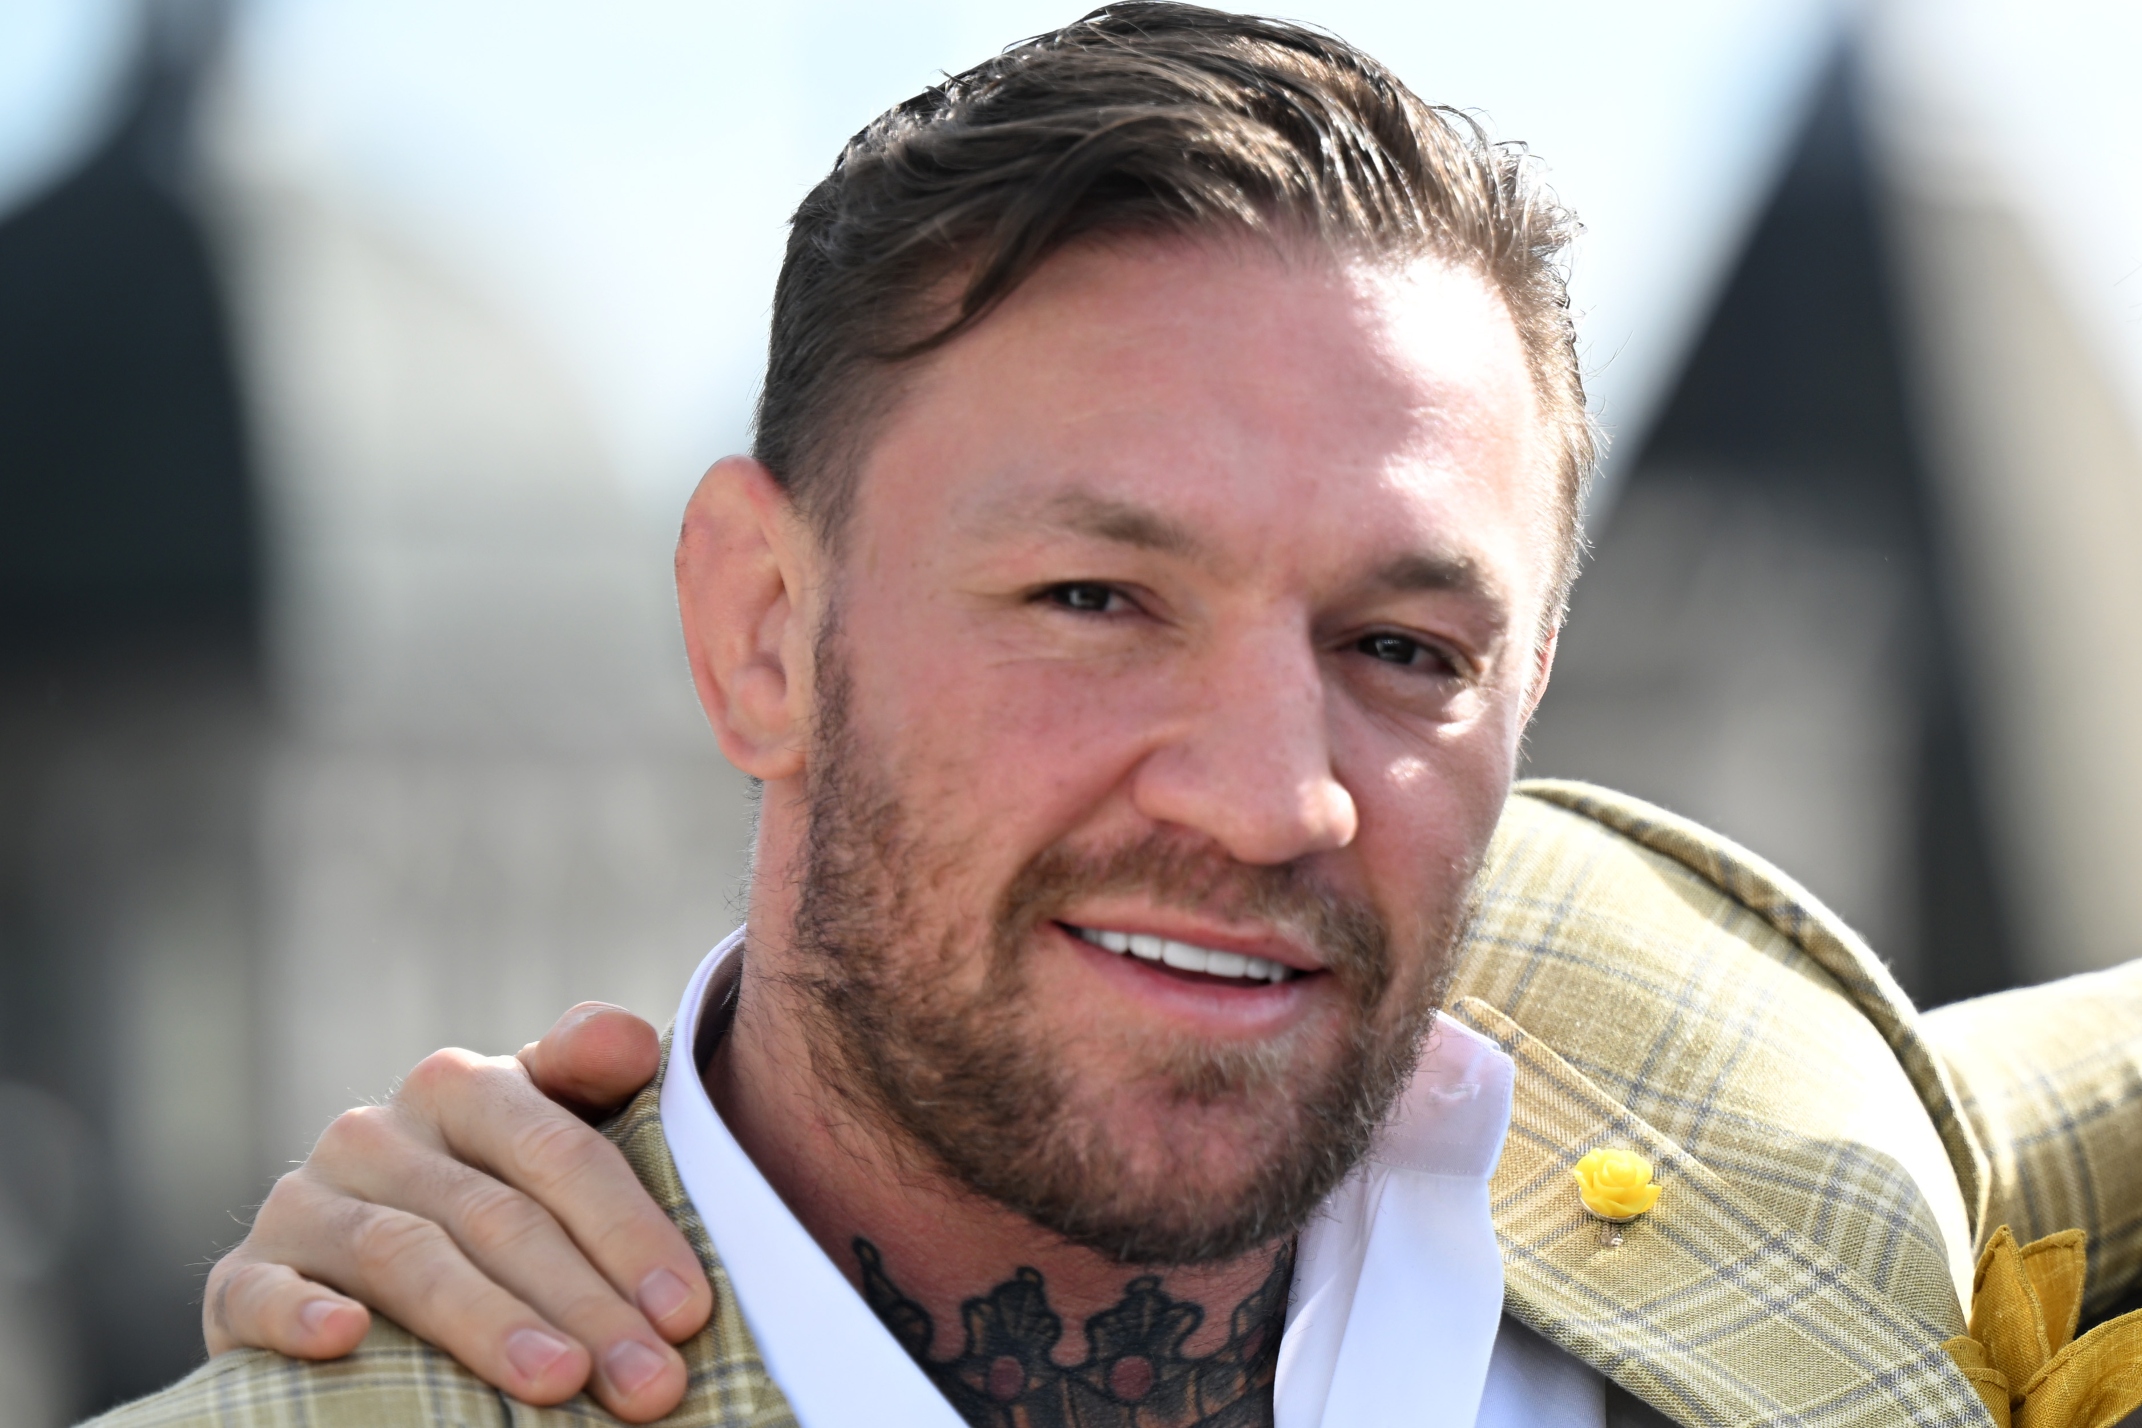 ufc-star-conor-mcgregor-accused-of-cocaine-use-after-erratic-road-house-interview